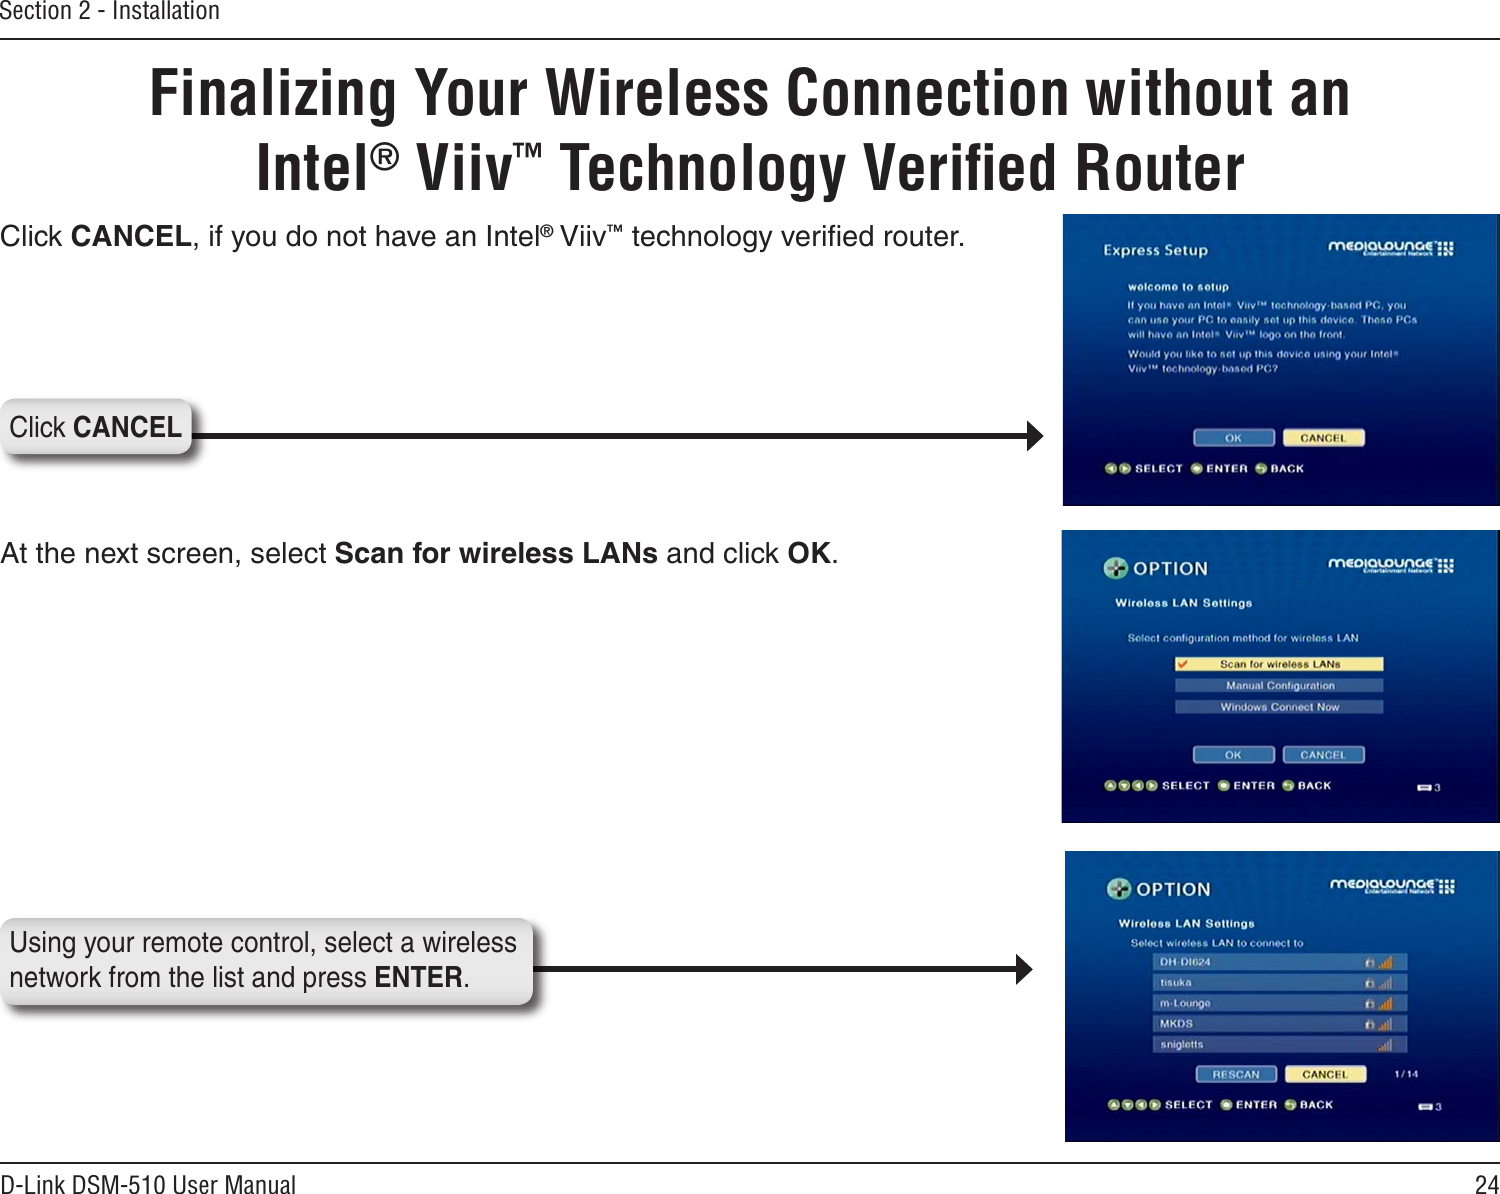 24D-Link DSM-510 User ManualSection 2 - InstallationFinalizing Your Wireless Connection without an  Intel® Viiv™ Technology Veriﬁed RouterAt the next screen, select Scan for wireless LANs and click OK.Click CANCELClick CANCEL, if you do not have an Intel® Viiv™ technology veriﬁed router. Using your remote control, select a wireless network from the list and press ENTER.